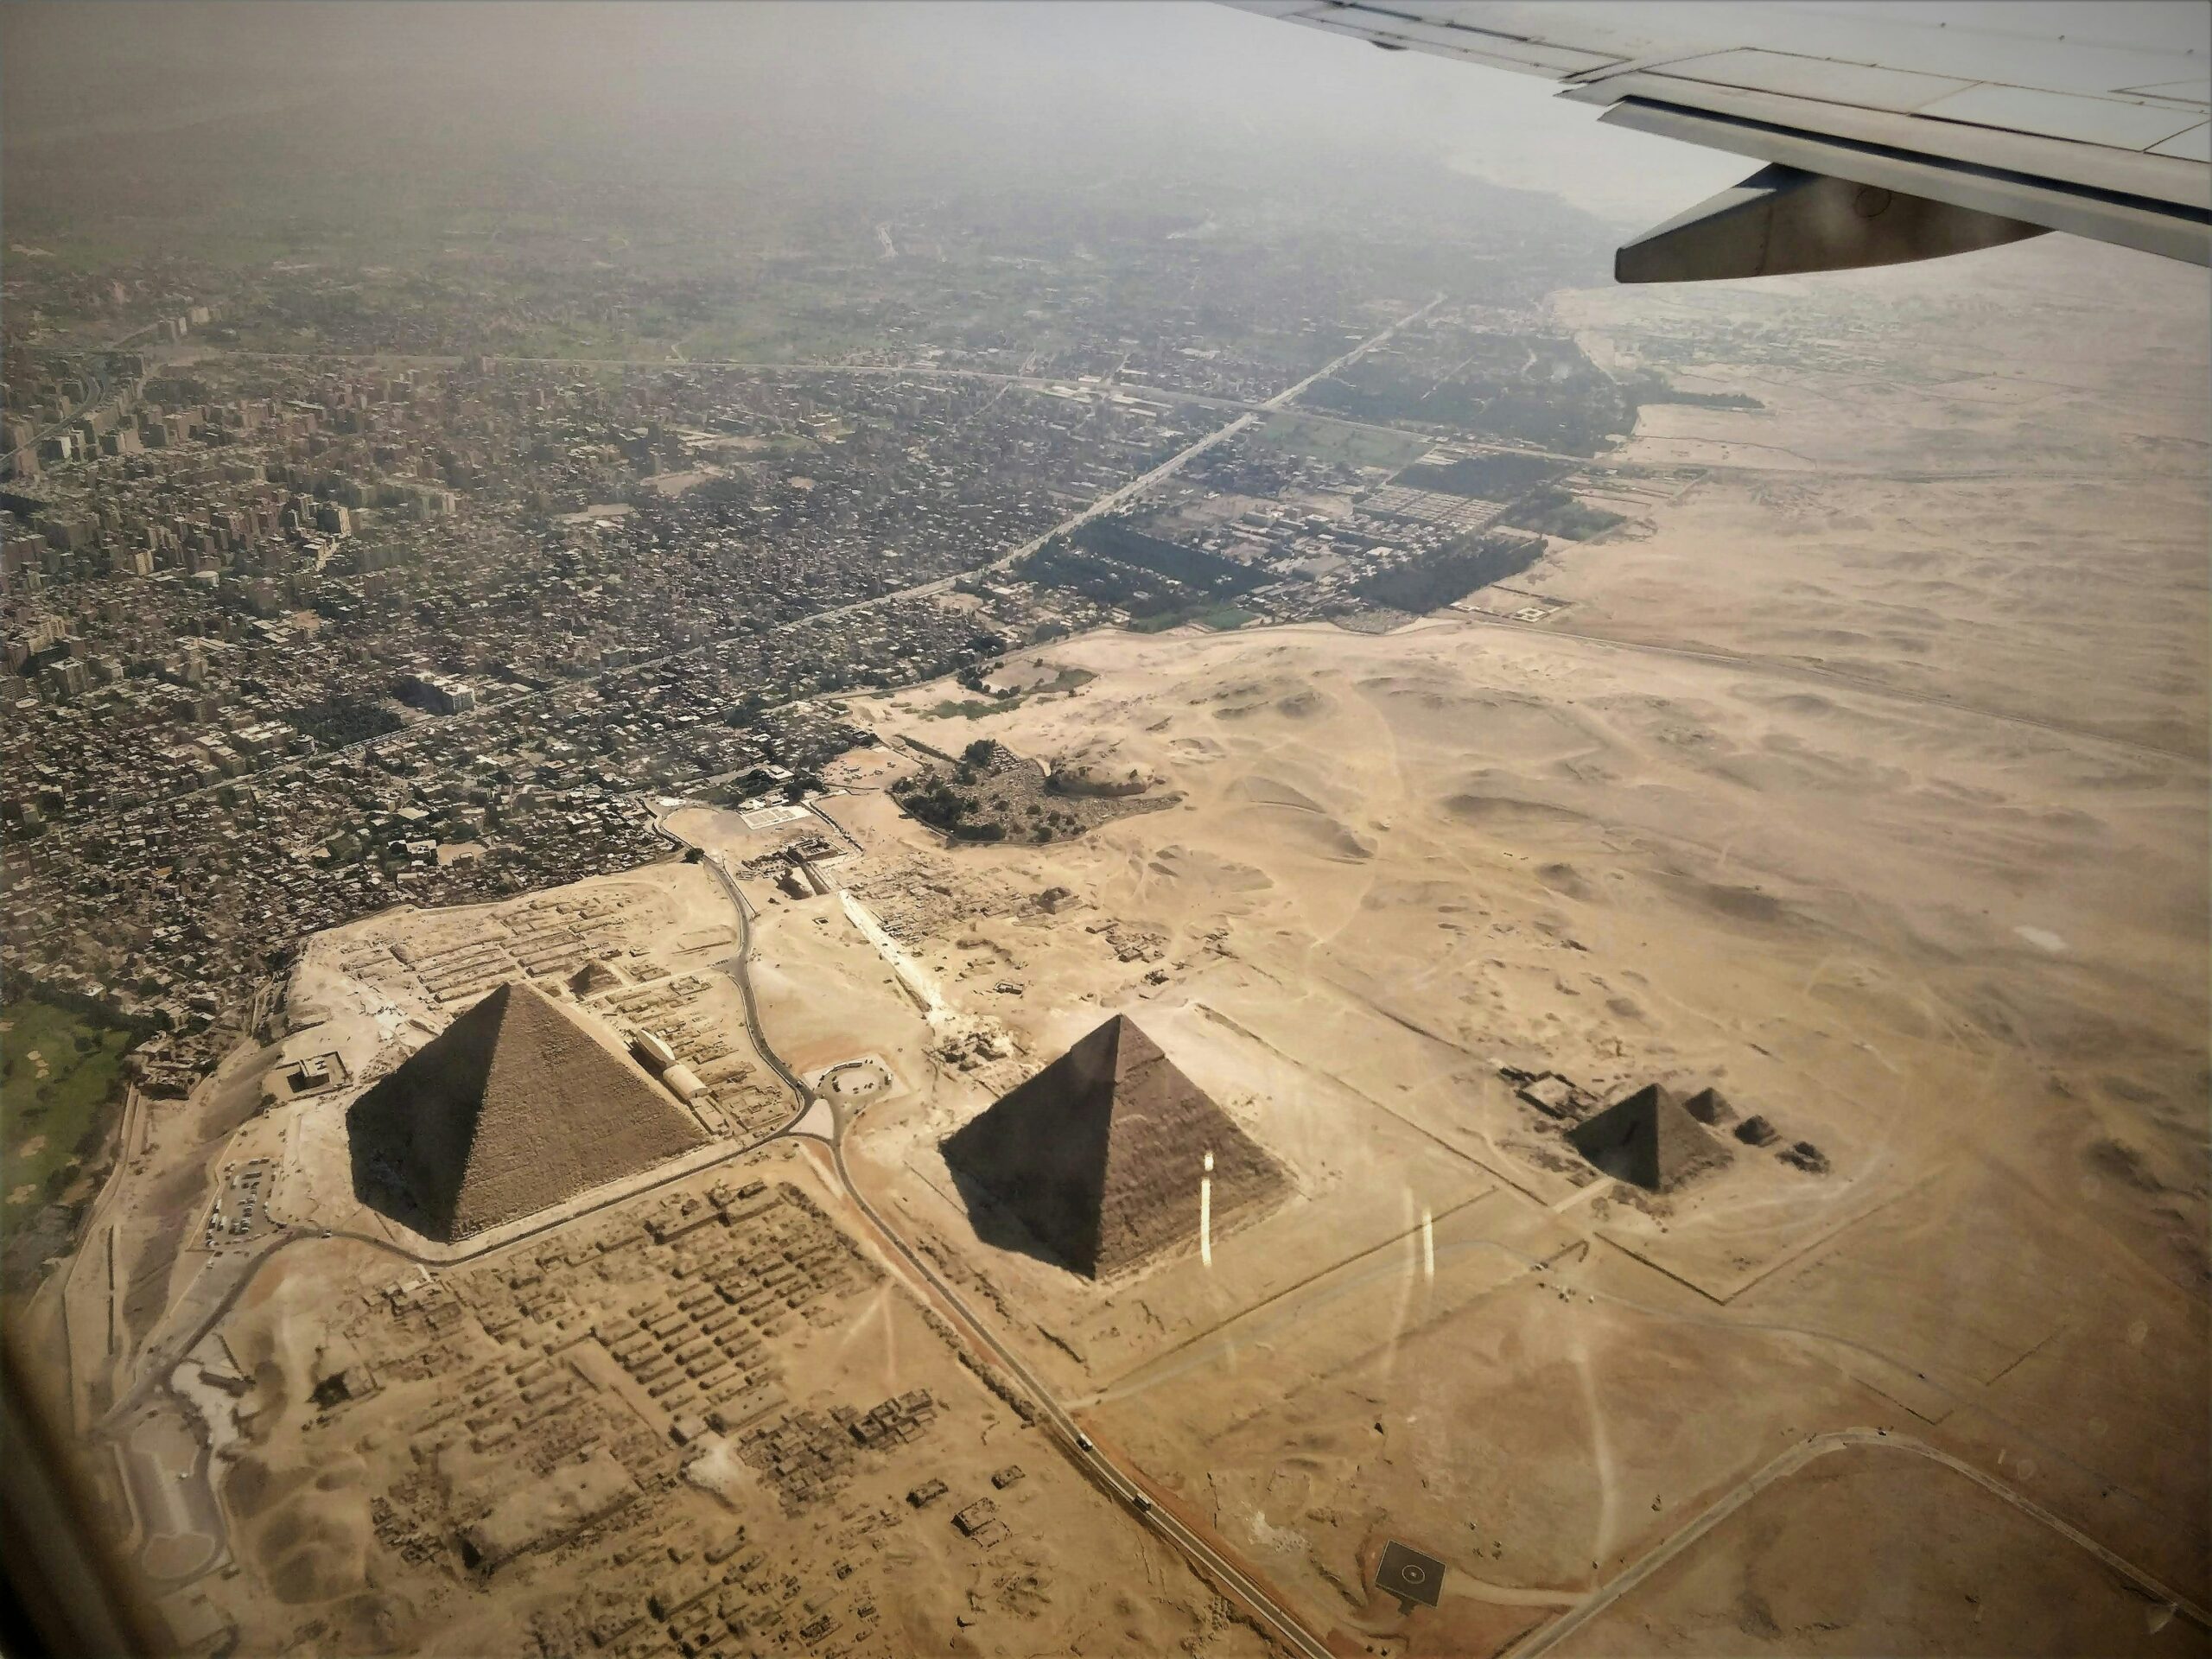 An ariel view of Giza Pyramids depicting how urban spurl is expanding aggressively and taking over both agricultural land and the desert surrounding the Pyramids  